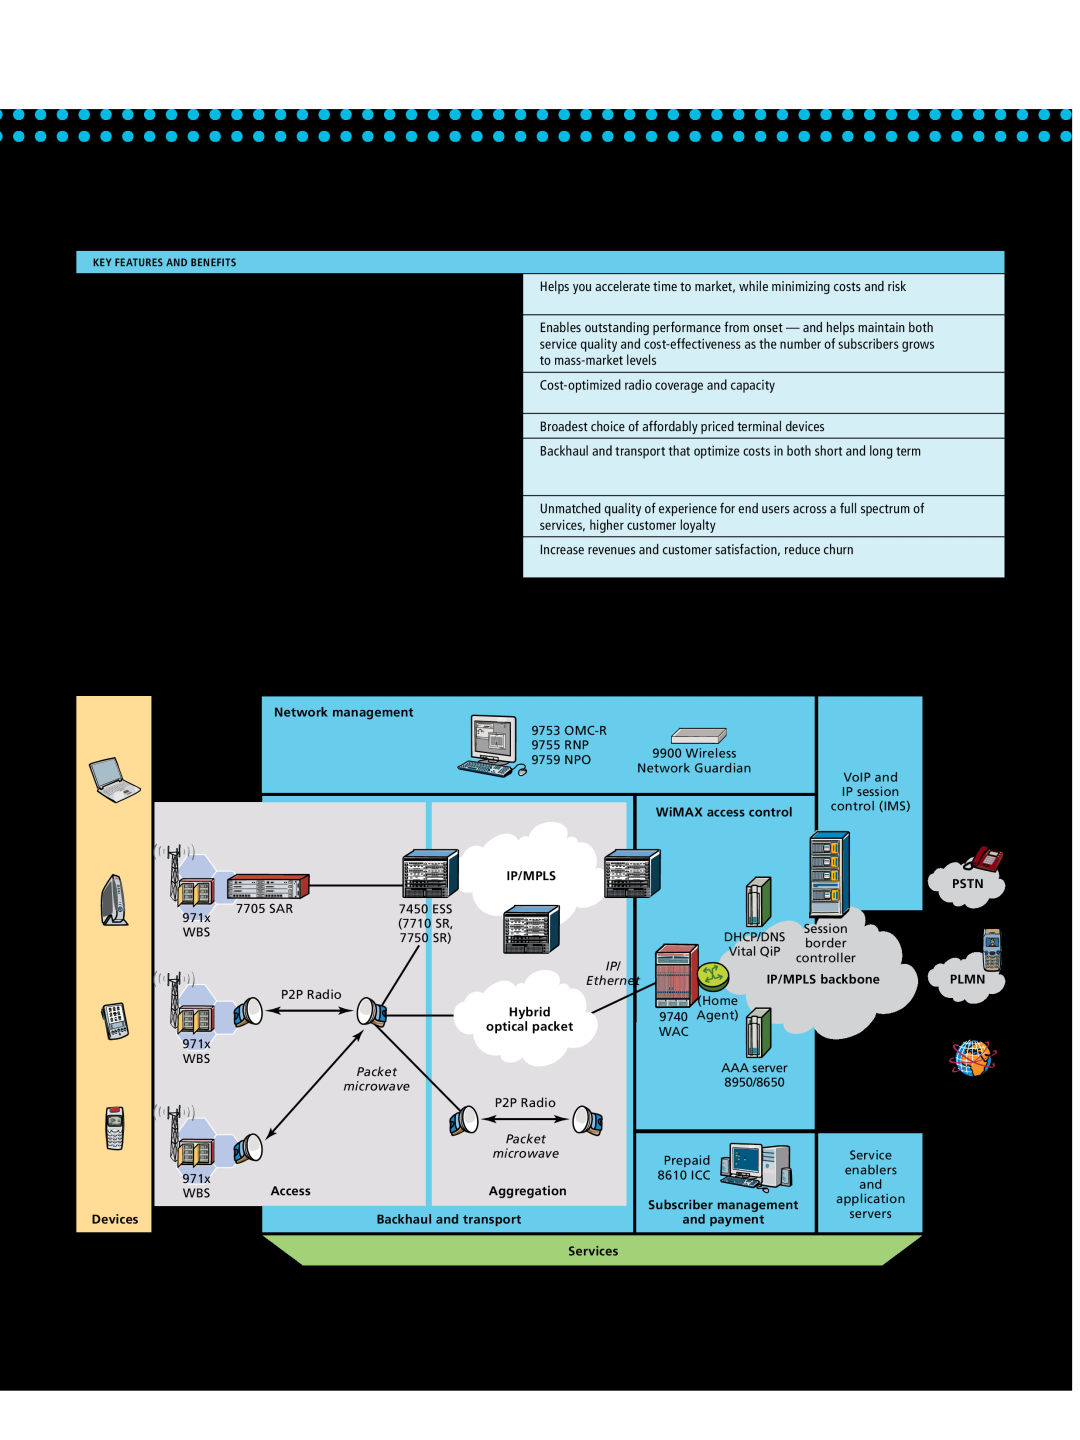 Alcatel-Lucent WiMAX manual The fully integrated end-to-end solution architecture 